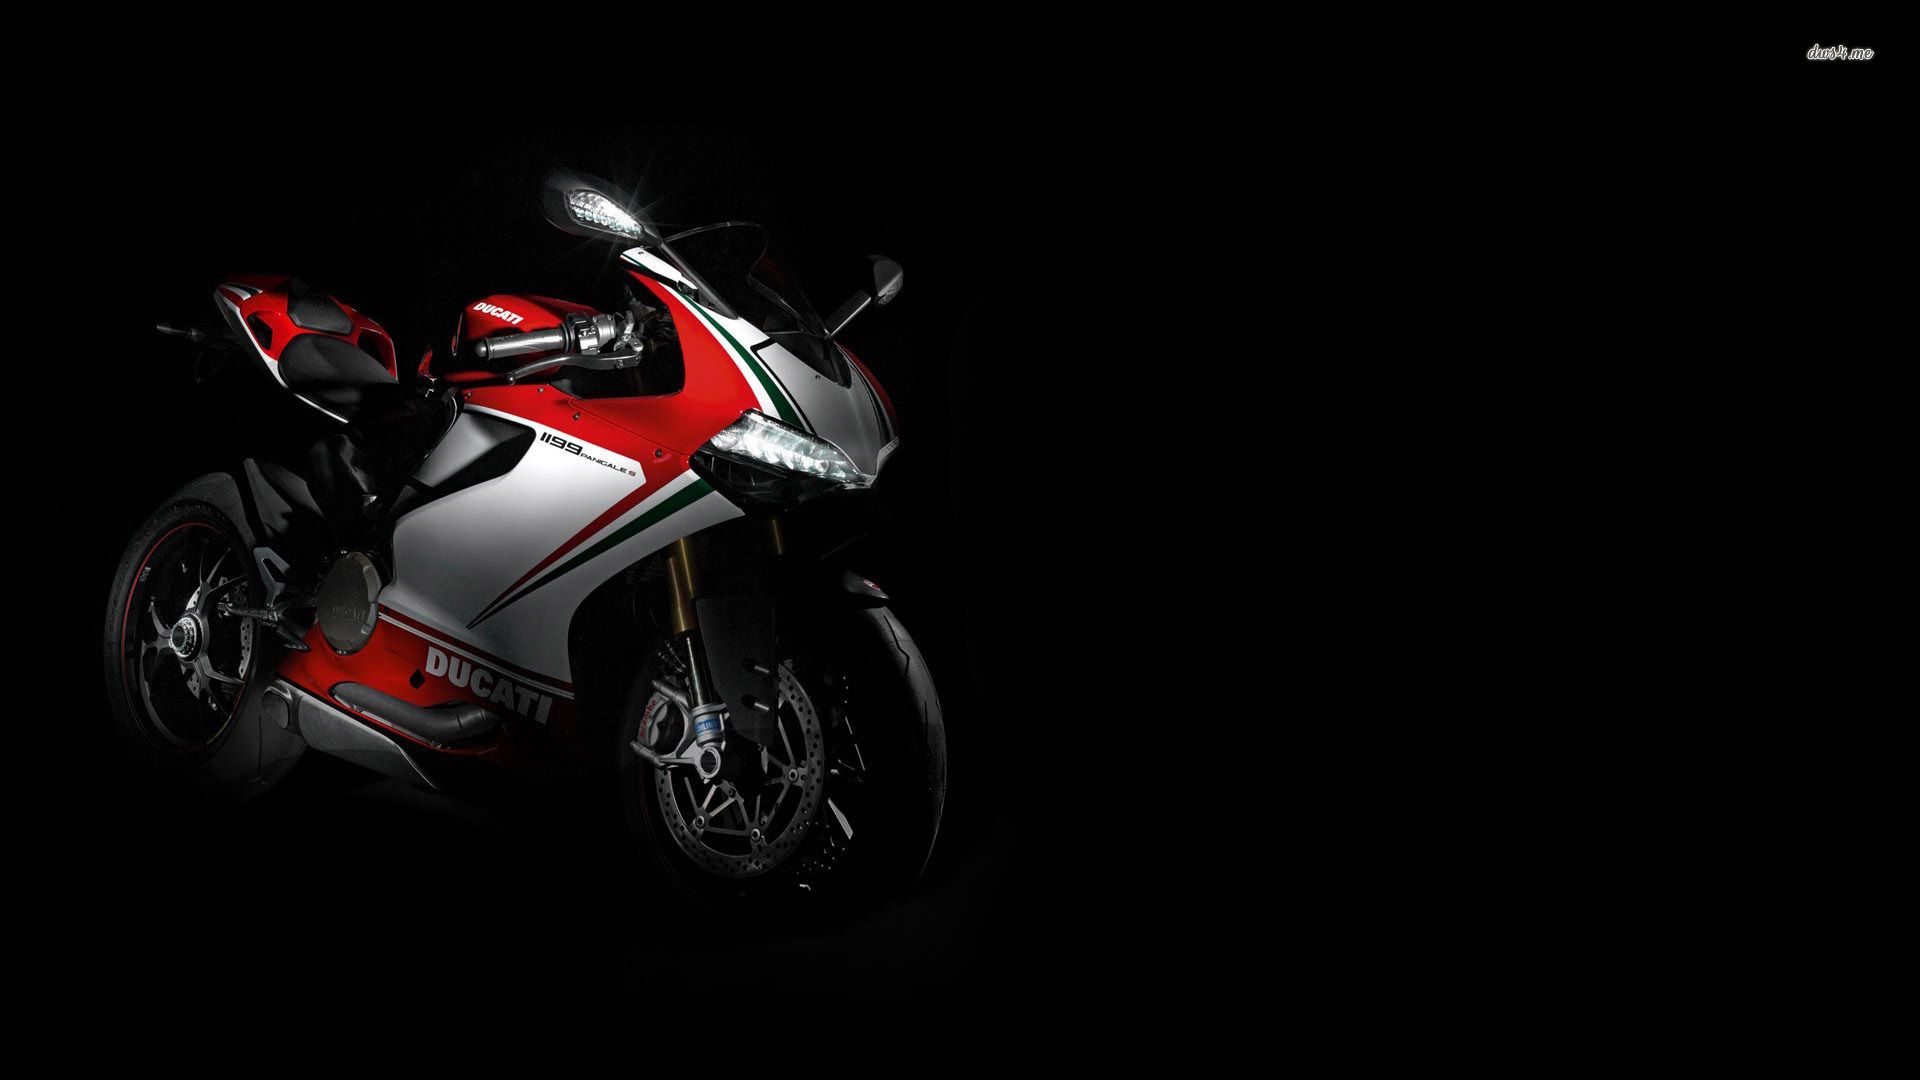 Ducati 1199 Panigale wallpaper - Motorcycle wallpapers - #10095